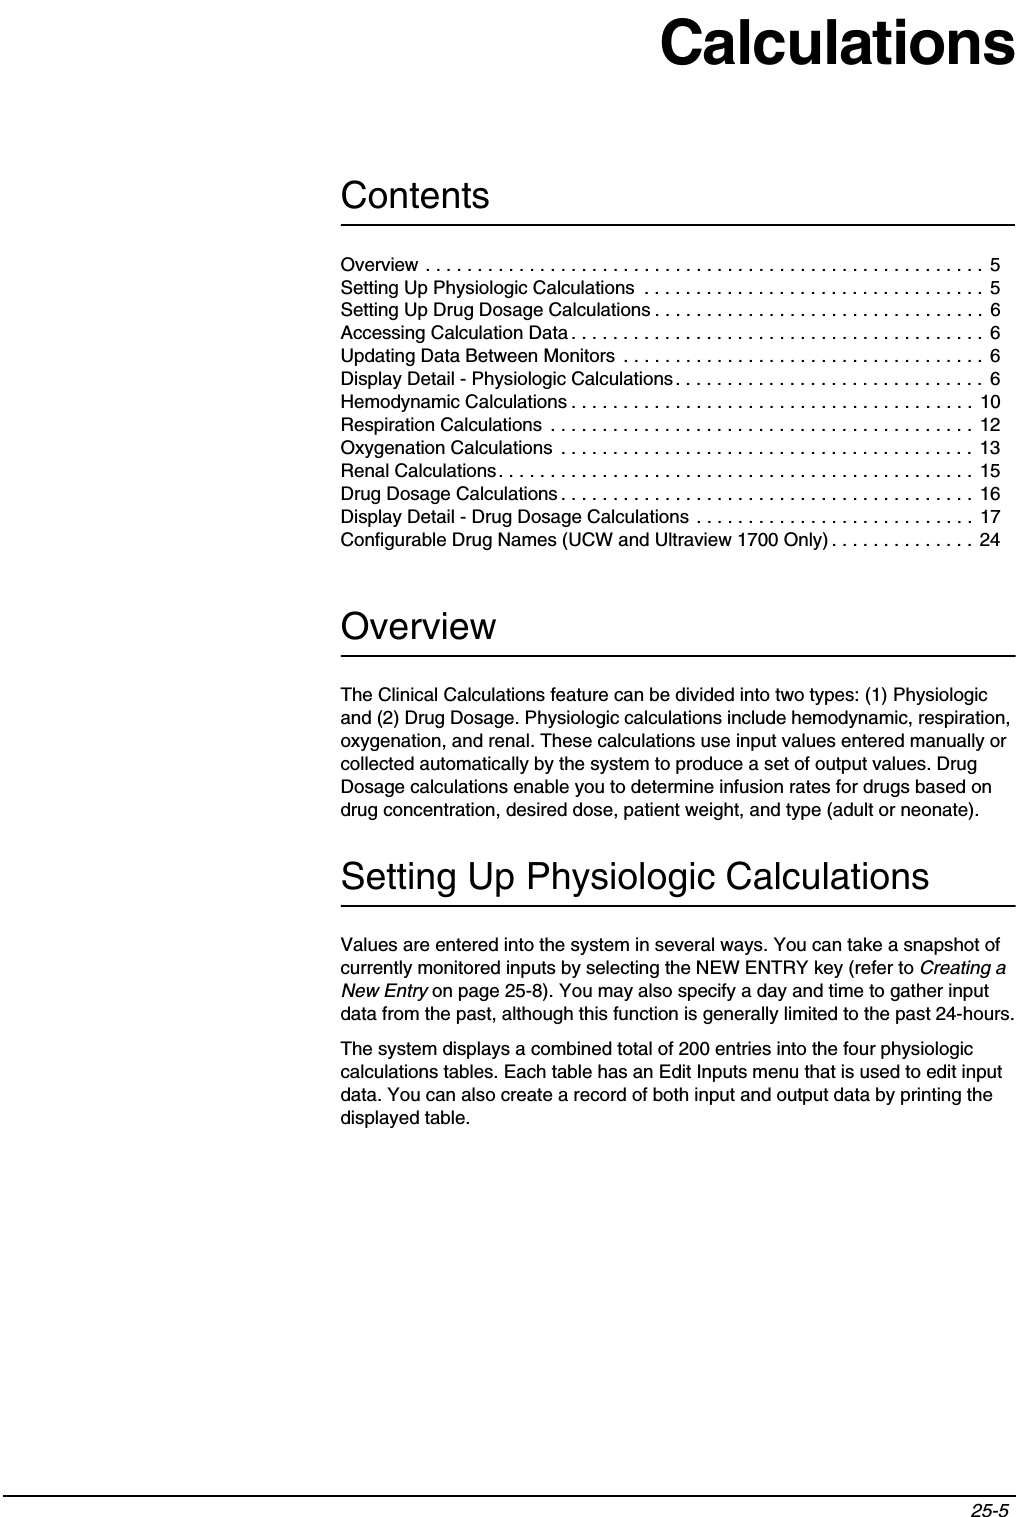 Contents25-5 Overview . . . . . . . . . . . . . . . . . . . . . . . . . . . . . . . . . . . . . . . . . . . . . . . . . . . . . .  5Setting Up Physiologic Calculations  . . . . . . . . . . . . . . . . . . . . . . . . . . . . . . . . .  5Setting Up Drug Dosage Calculations . . . . . . . . . . . . . . . . . . . . . . . . . . . . . . . . 6Accessing Calculation Data . . . . . . . . . . . . . . . . . . . . . . . . . . . . . . . . . . . . . . . . 6Updating Data Between Monitors  . . . . . . . . . . . . . . . . . . . . . . . . . . . . . . . . . . . 6Display Detail - Physiologic Calculations. . . . . . . . . . . . . . . . . . . . . . . . . . . . . . 6Hemodynamic Calculations . . . . . . . . . . . . . . . . . . . . . . . . . . . . . . . . . . . . . . .  10Respiration Calculations  . . . . . . . . . . . . . . . . . . . . . . . . . . . . . . . . . . . . . . . . . 12Oxygenation Calculations  . . . . . . . . . . . . . . . . . . . . . . . . . . . . . . . . . . . . . . . .  13Renal Calculations. . . . . . . . . . . . . . . . . . . . . . . . . . . . . . . . . . . . . . . . . . . . . .  15Drug Dosage Calculations . . . . . . . . . . . . . . . . . . . . . . . . . . . . . . . . . . . . . . . .  16Display Detail - Drug Dosage Calculations . . . . . . . . . . . . . . . . . . . . . . . . . . . 17Configurable Drug Names (UCW and Ultraview 1700 Only) . . . . . . . . . . . . . . 24CalculationsOverviewThe Clinical Calculations feature can be divided into two types: (1) Physiologic and (2) Drug Dosage. Physiologic calculations include hemodynamic, respiration, oxygenation, and renal. These calculations use input values entered manually or collected automatically by the system to produce a set of output values. Drug Dosage calculations enable you to determine infusion rates for drugs based on drug concentration, desired dose, patient weight, and type (adult or neonate).Setting Up Physiologic CalculationsValues are entered into the system in several ways. You can take a snapshot of currently monitored inputs by selecting the NEW ENTRY key (refer to Creating a New Entry on page 25-8). You may also specify a day and time to gather input data from the past, although this function is generally limited to the past 24-hours.The system displays a combined total of 200 entries into the four physiologic calculations tables. Each table has an Edit Inputs menu that is used to edit input data. You can also create a record of both input and output data by printing the displayed table.